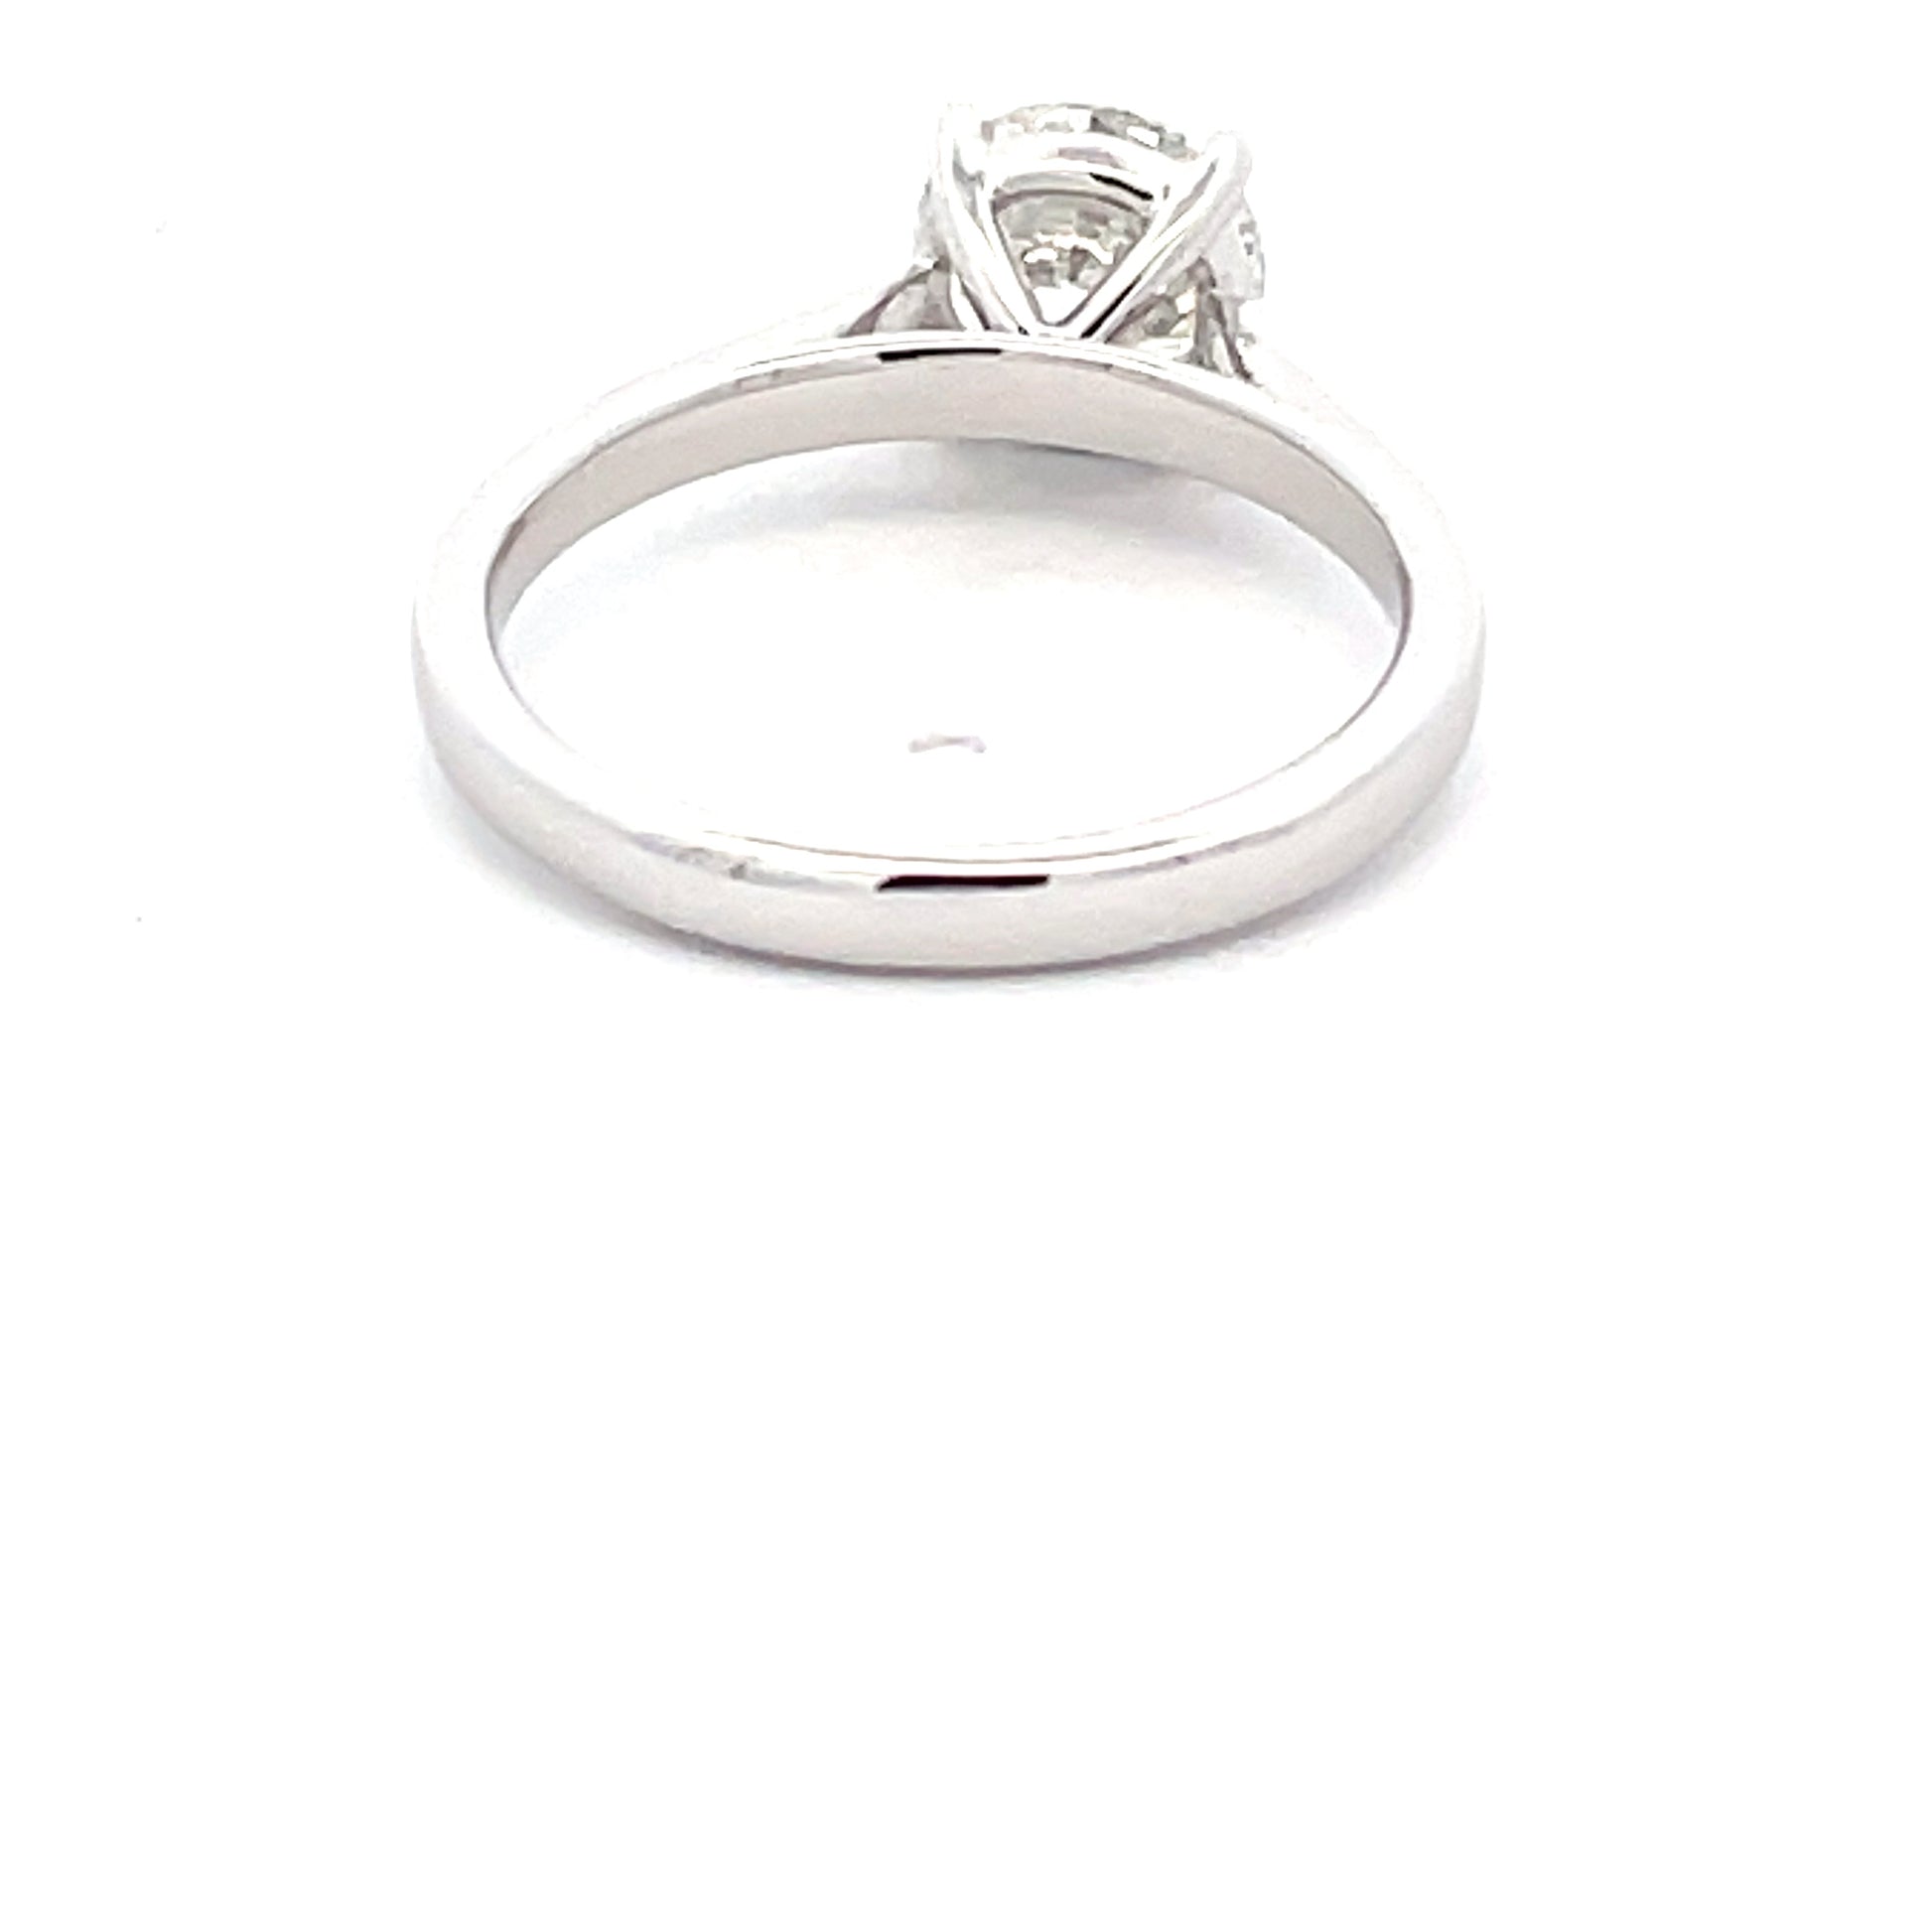 Round Brilliant Cut Diamond Solitaire Ring - 1.41cts  Gardiner Brothers   